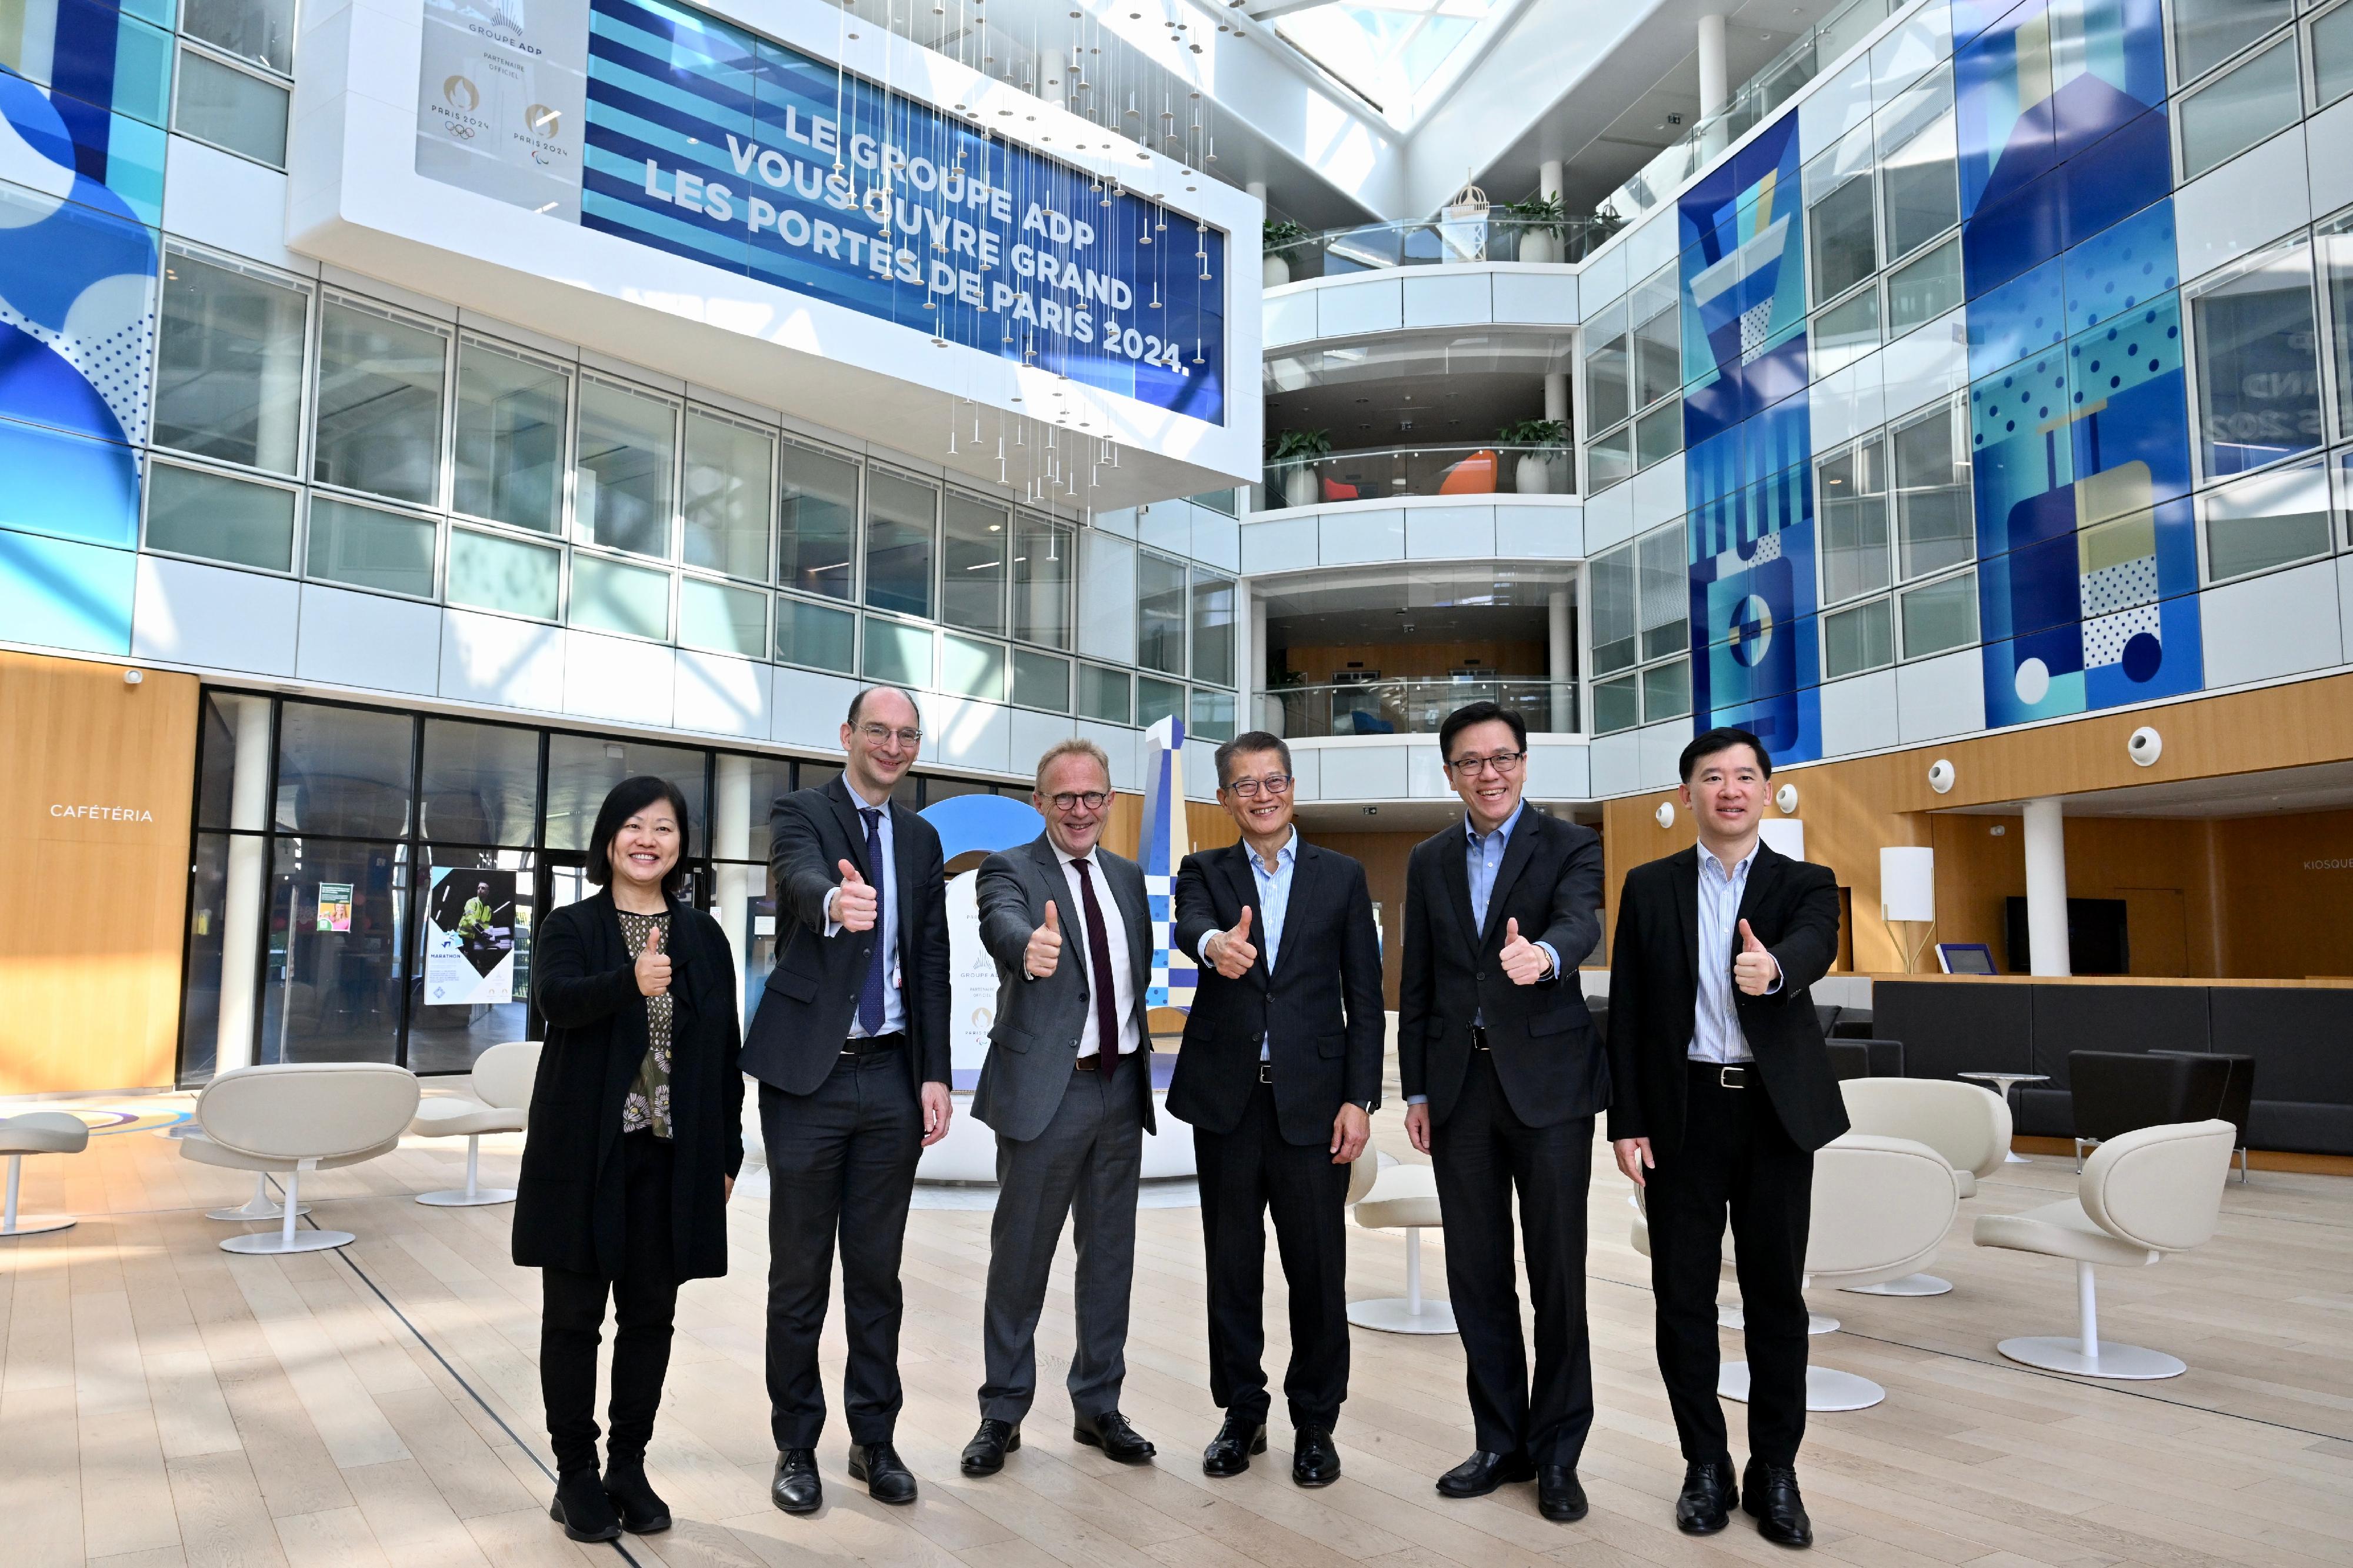 The Financial Secretary, Mr Paul Chan, accompanied by the Secretary for Innovation, Technology and Industry, Professor Sun Dong, and the Under Secretary for Constitutional and Mainland Affairs, Mr Clement Woo, visited the Innovation Hub of Groupe ADP at Paris Charles de Gaulle Airport today (May 25, Paris Time). Photo shows Mr Chan (third right), Professor Sun (second right), Mr Woo (first right), and Special Representative for Hong Kong Economic and Trade Affairs to the European Union, Ms Shirley Yung (first left) in a group photo with the senior management of Groupe ADP.